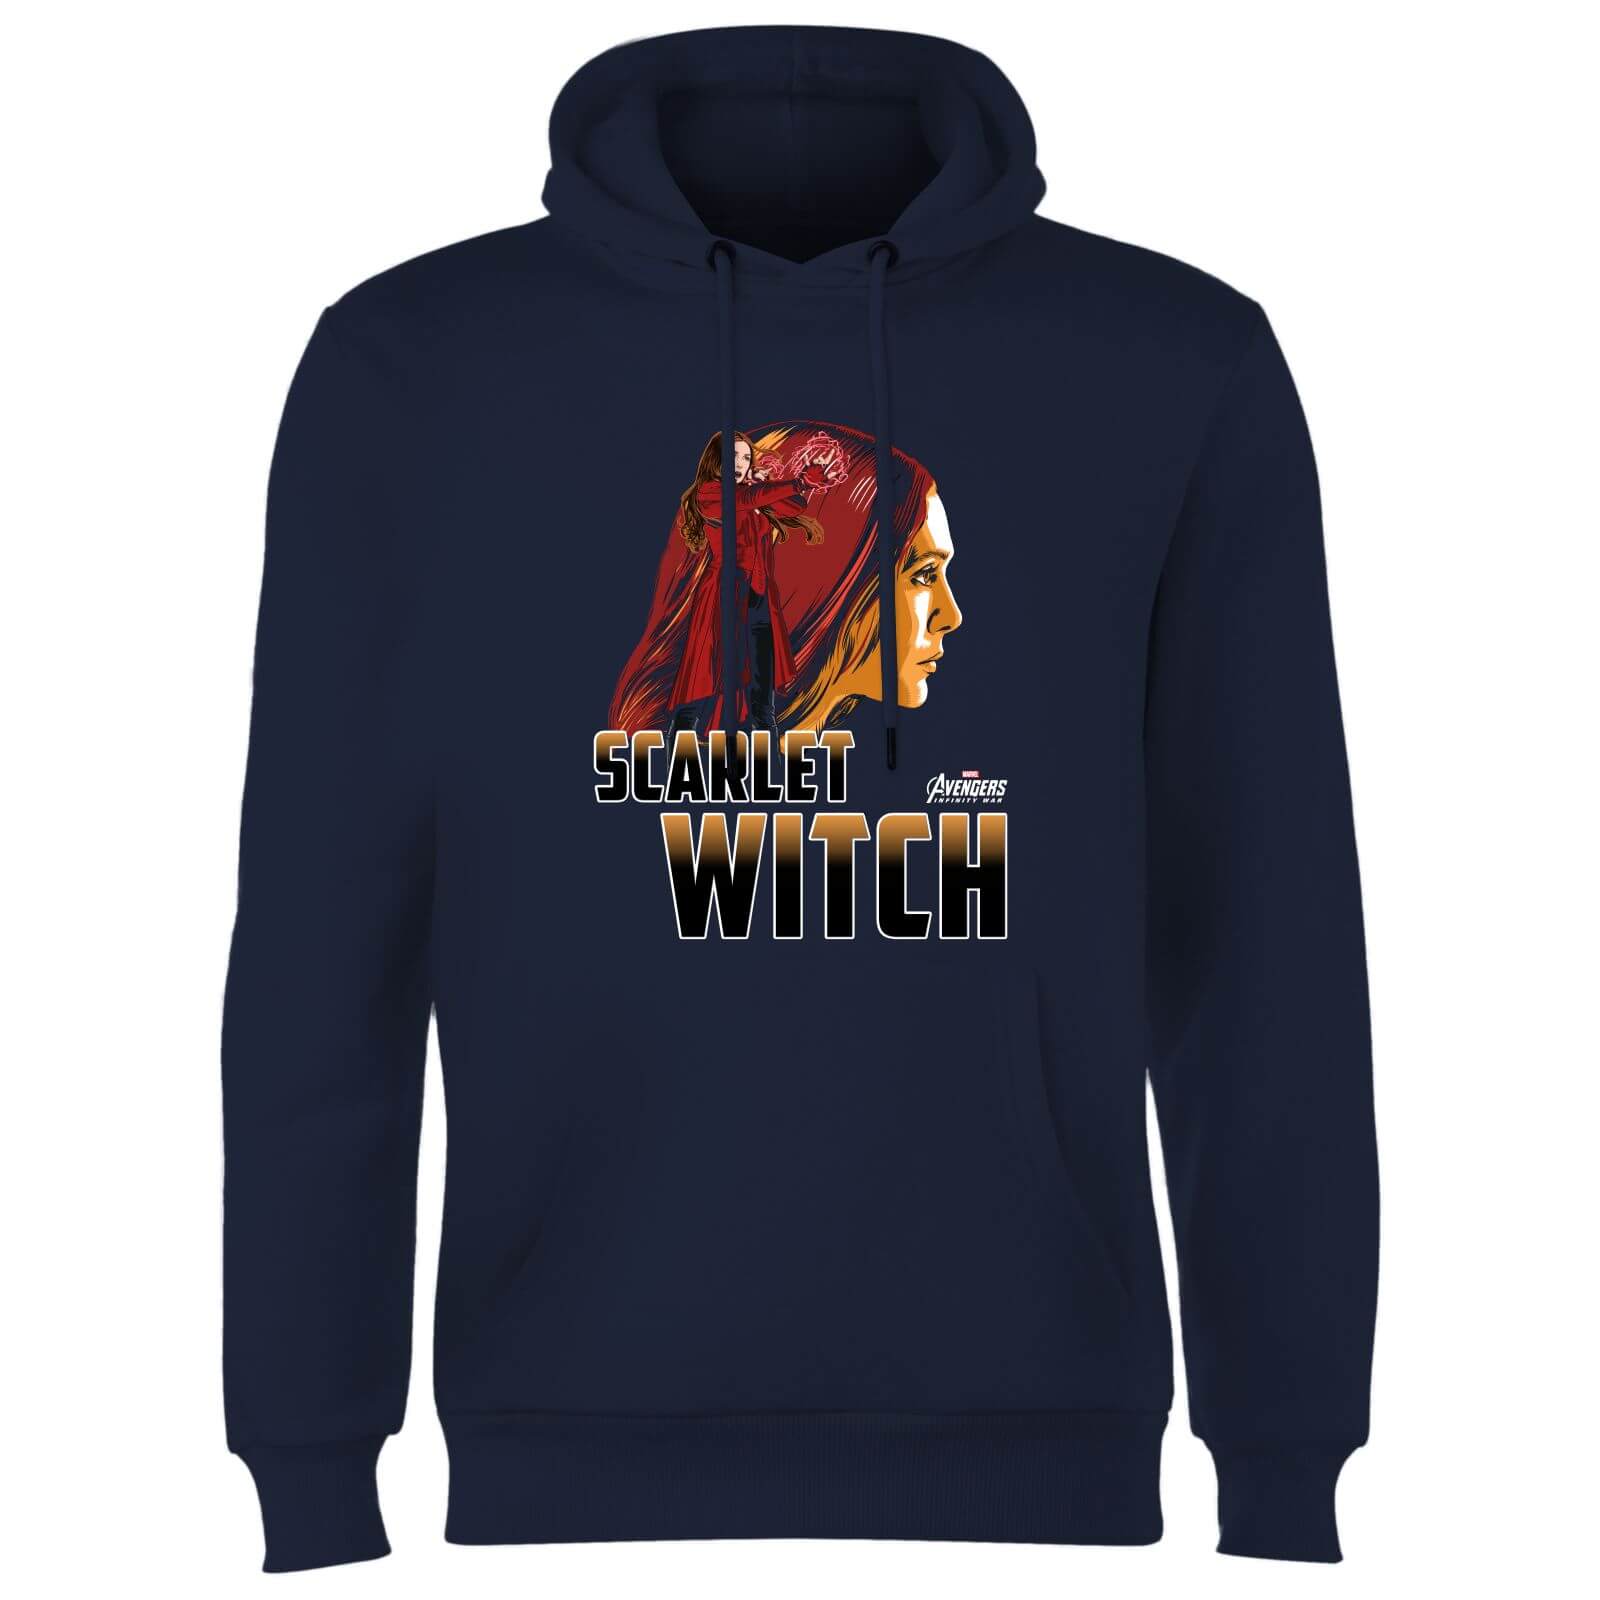 Avengers Scarlet Witch Hoodie - Navy - S